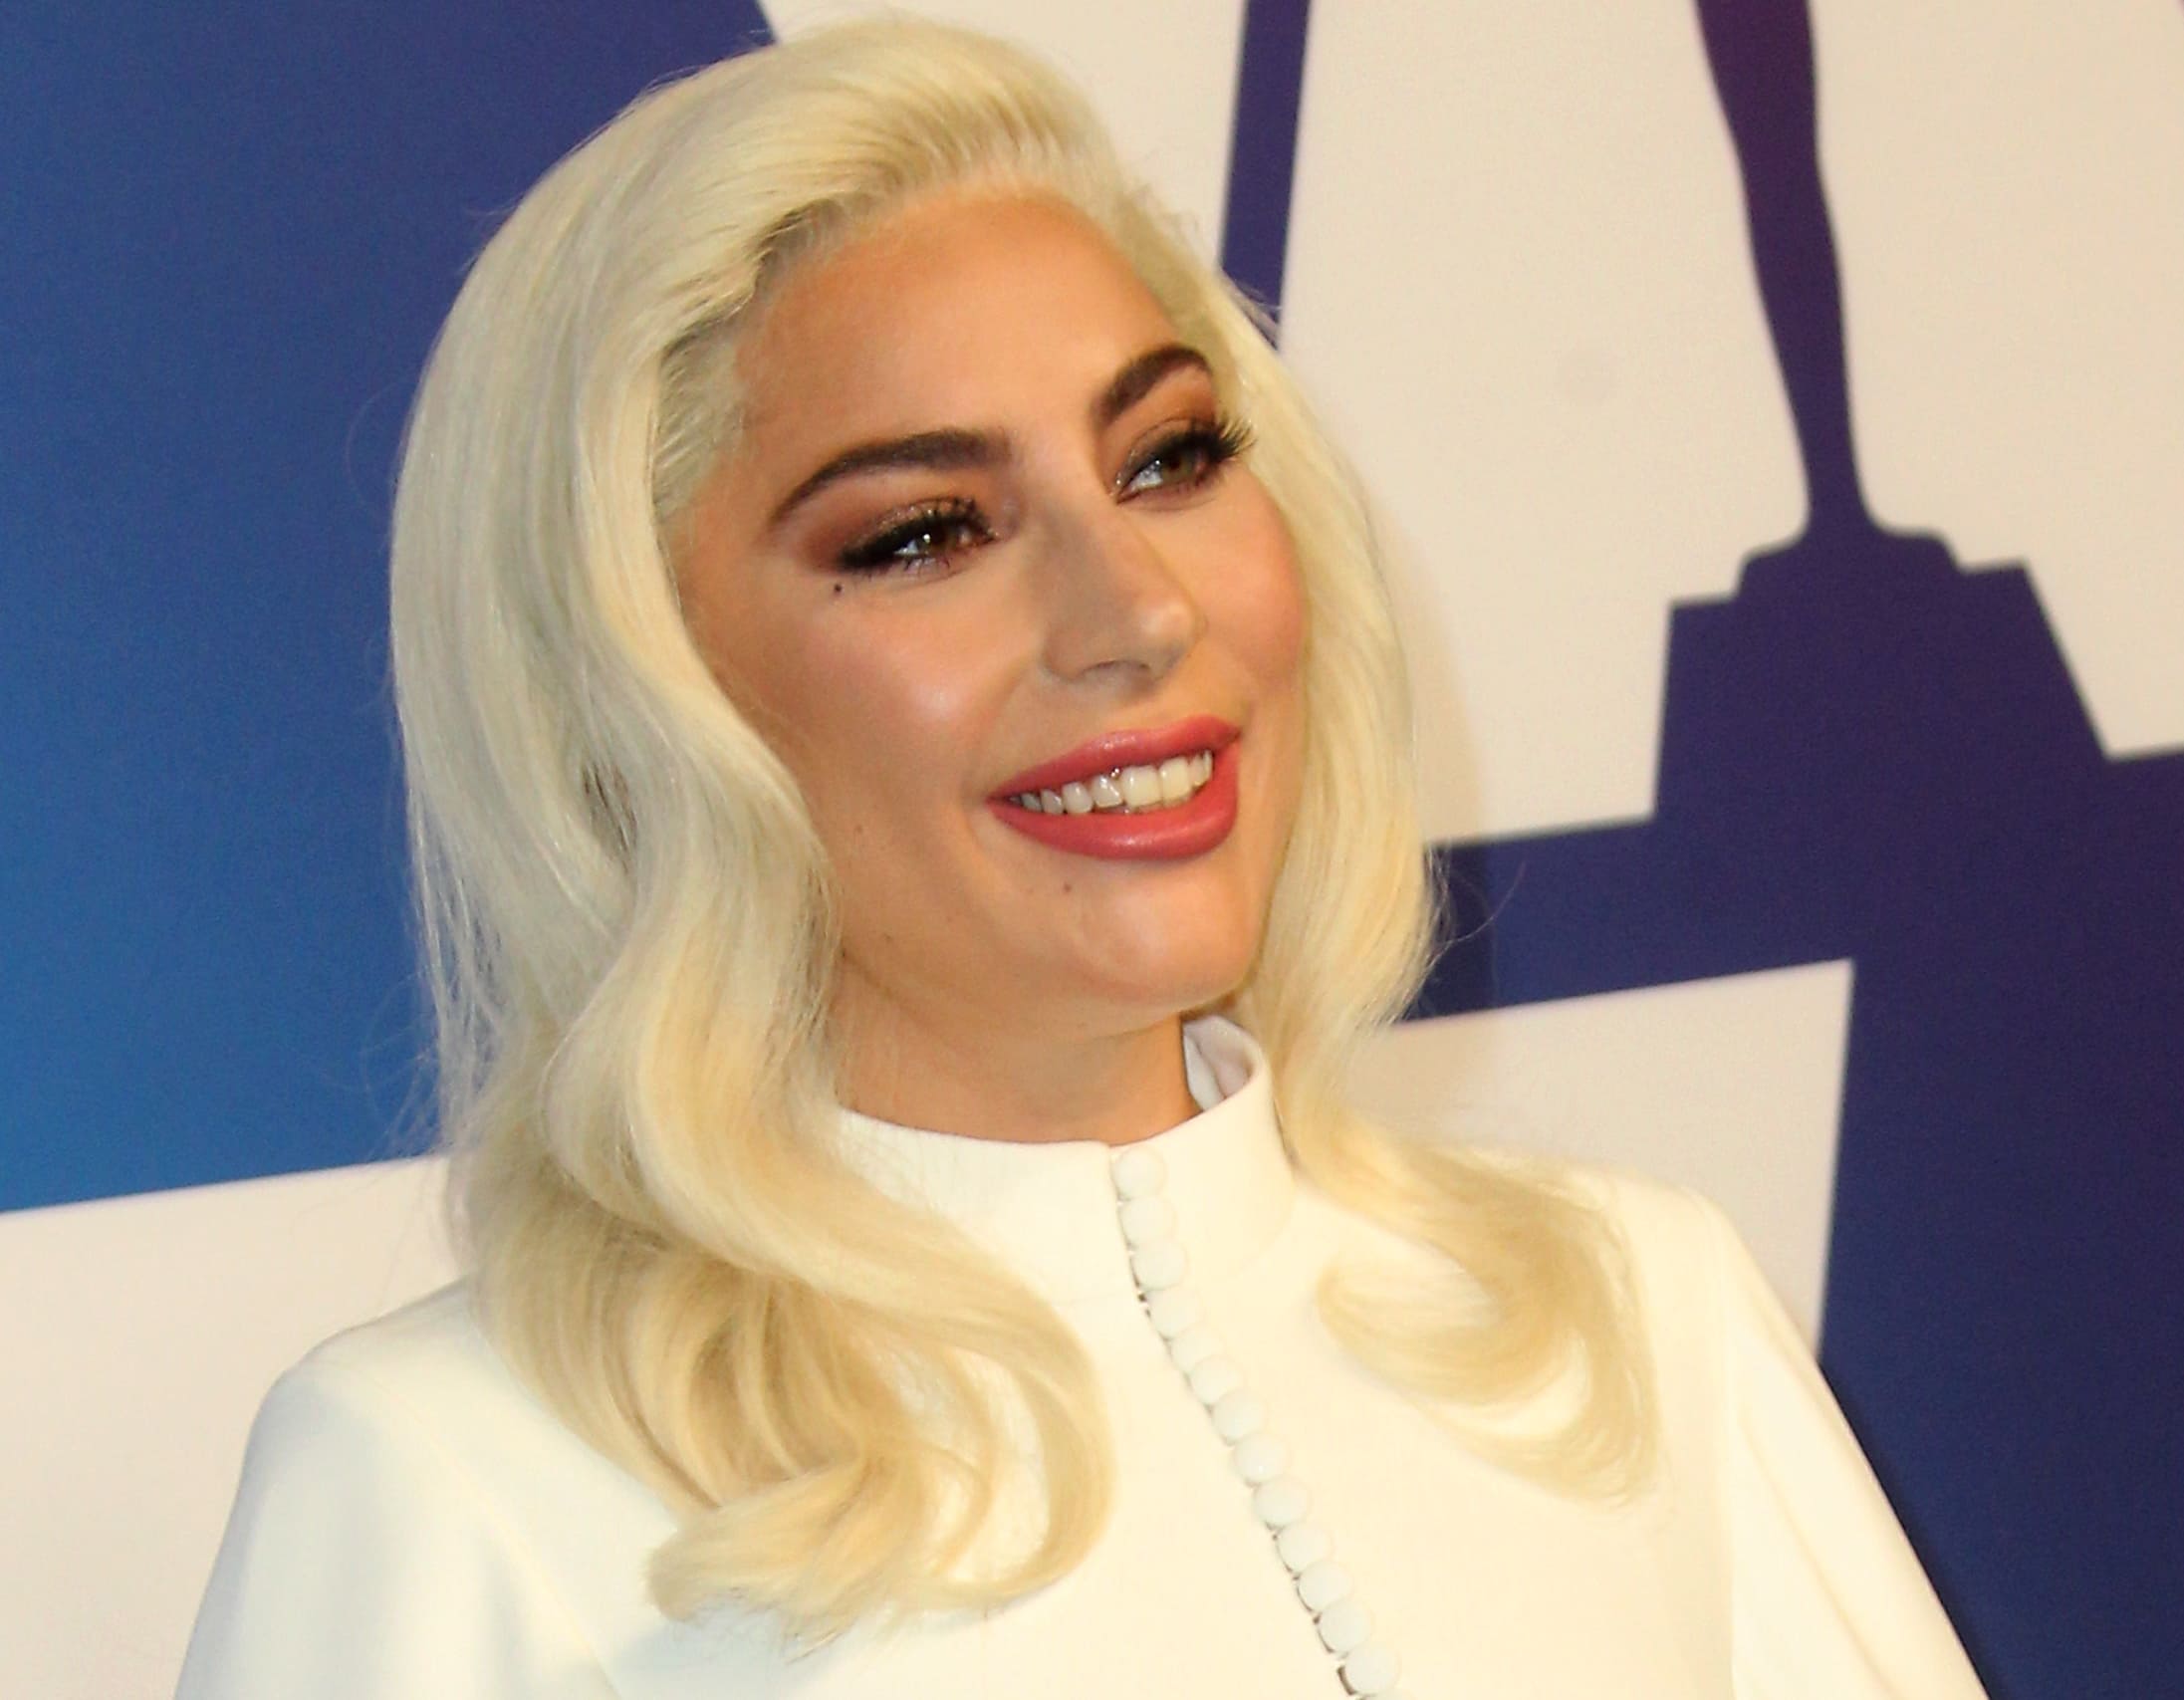 Lady Gaga with too much makeup at the 2019 Oscar Nominees Luncheon